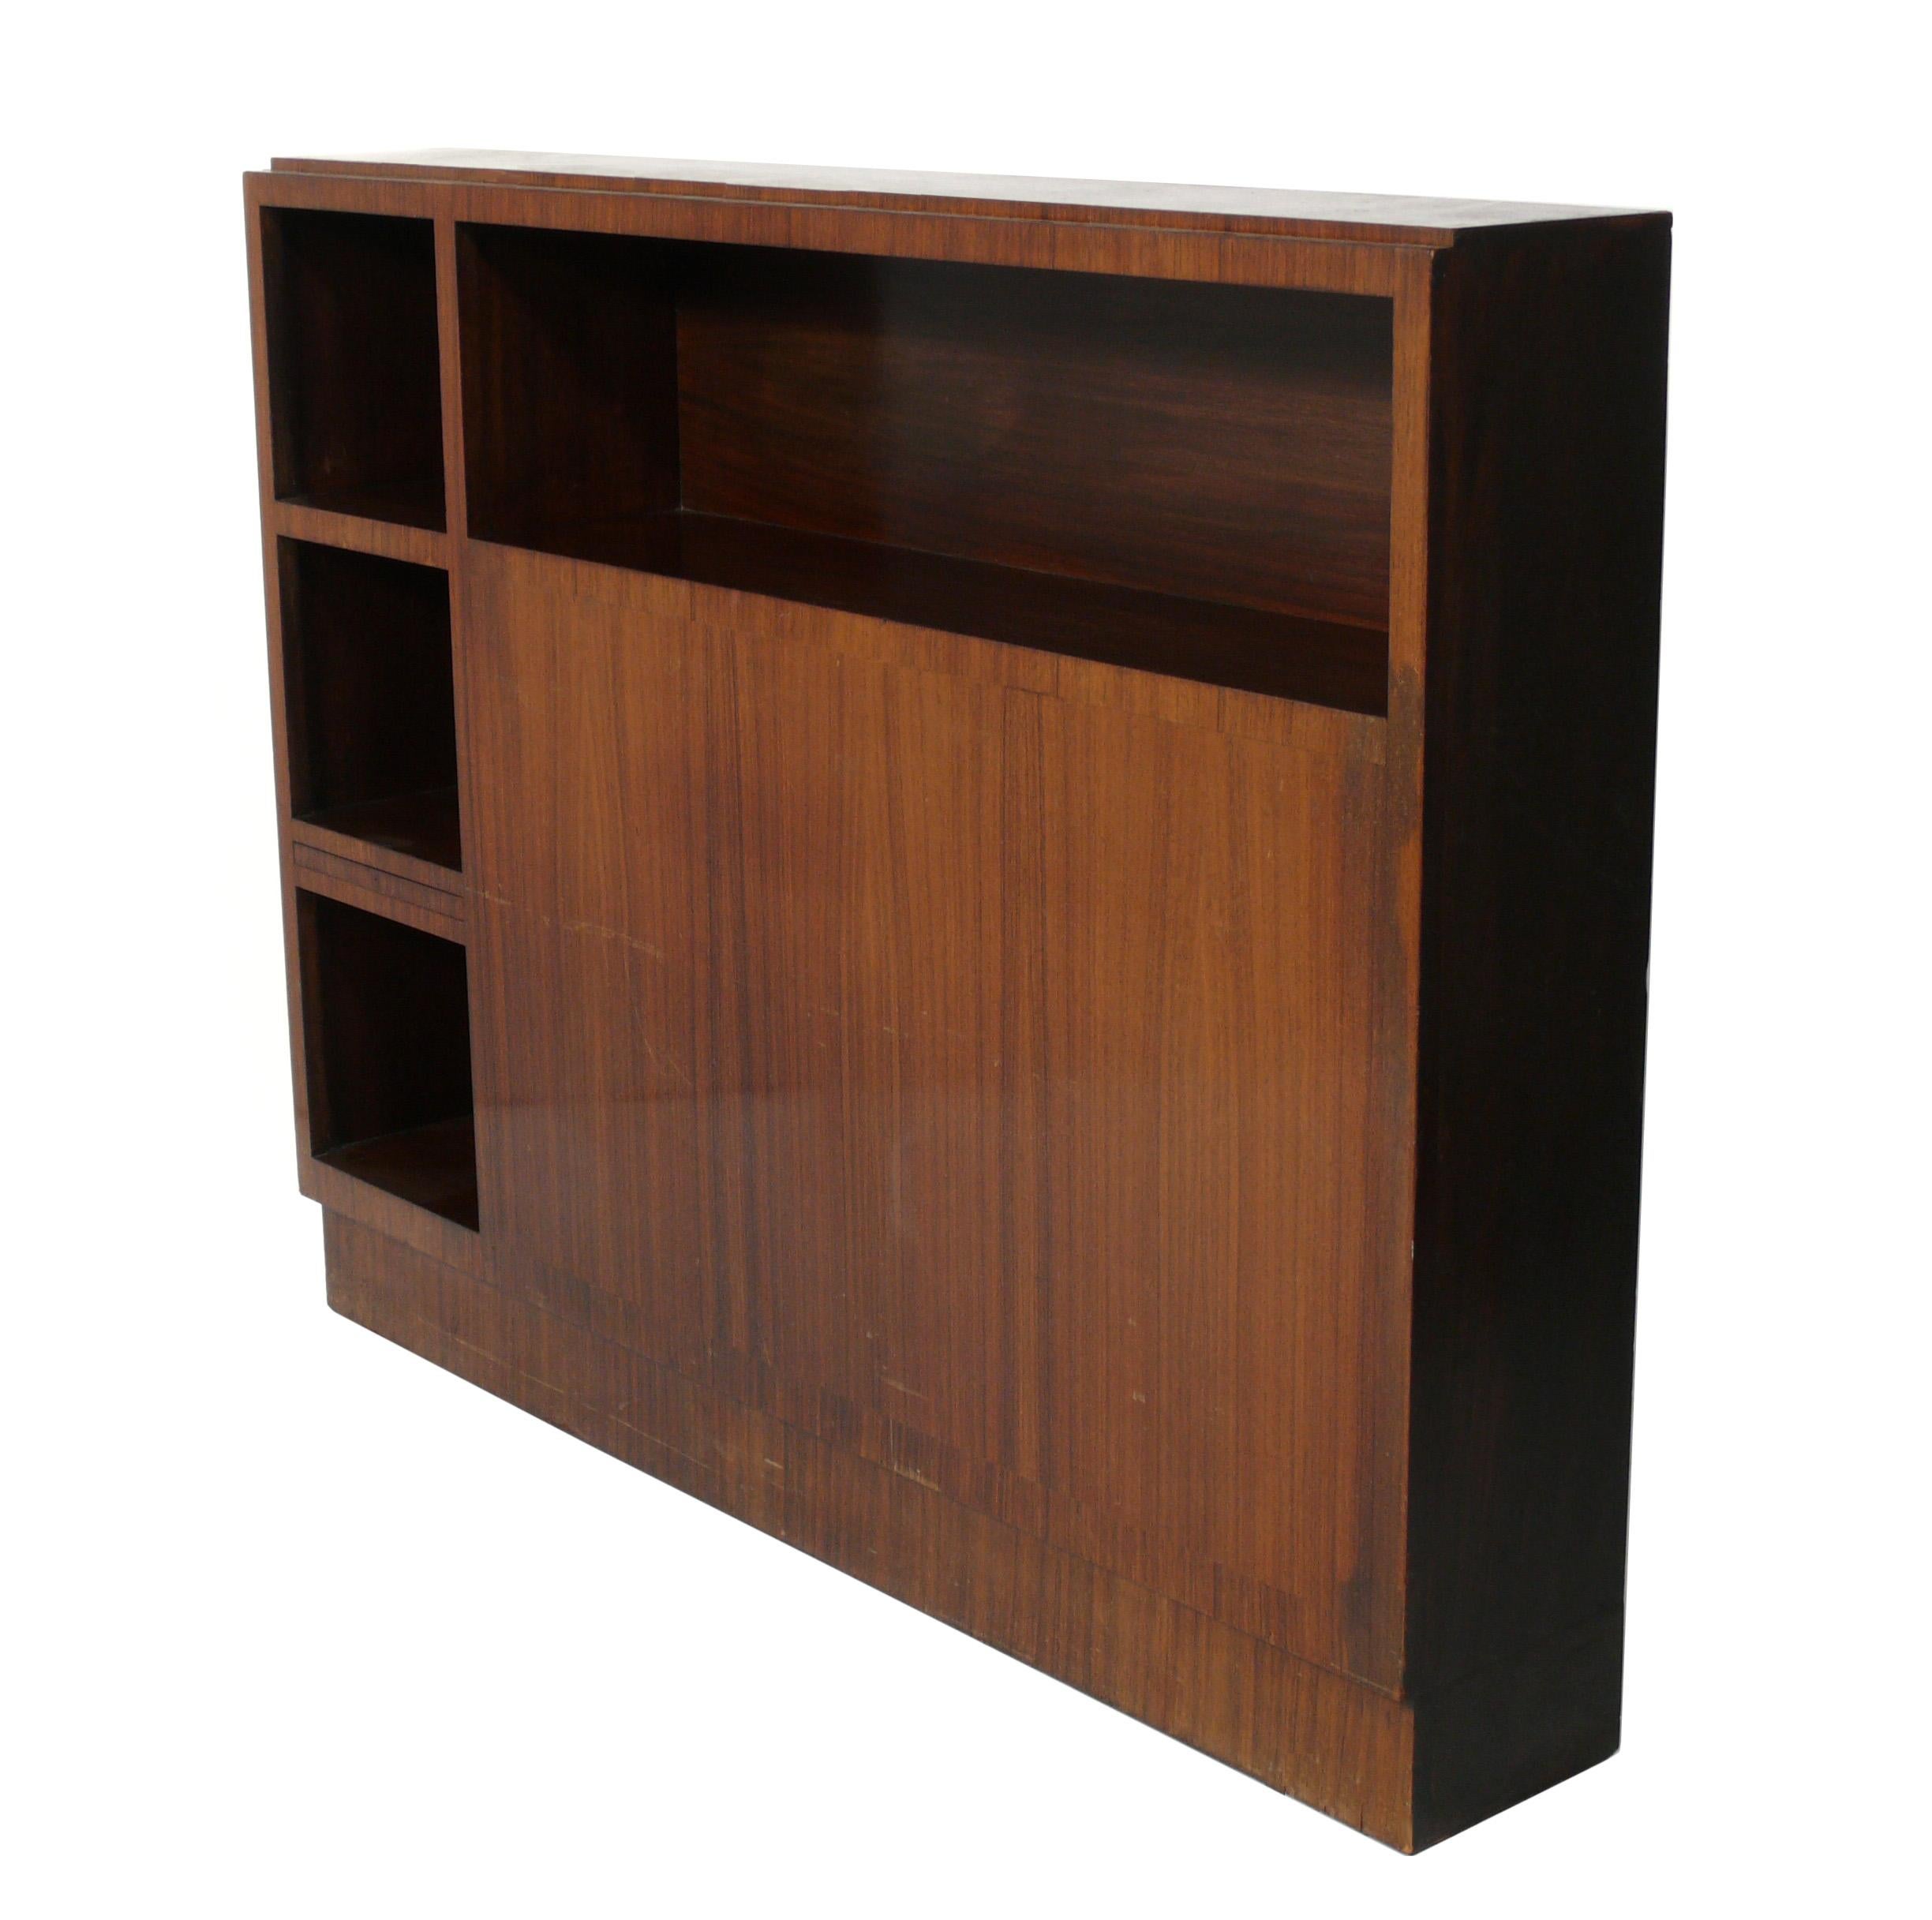 French Art Deco rosewood headboard or bookcase, France, circa 1930s. This piece is currently being refinished and will look incredible when completed. The price noted includes refinishing. This piece is a versatile size and was probably originally